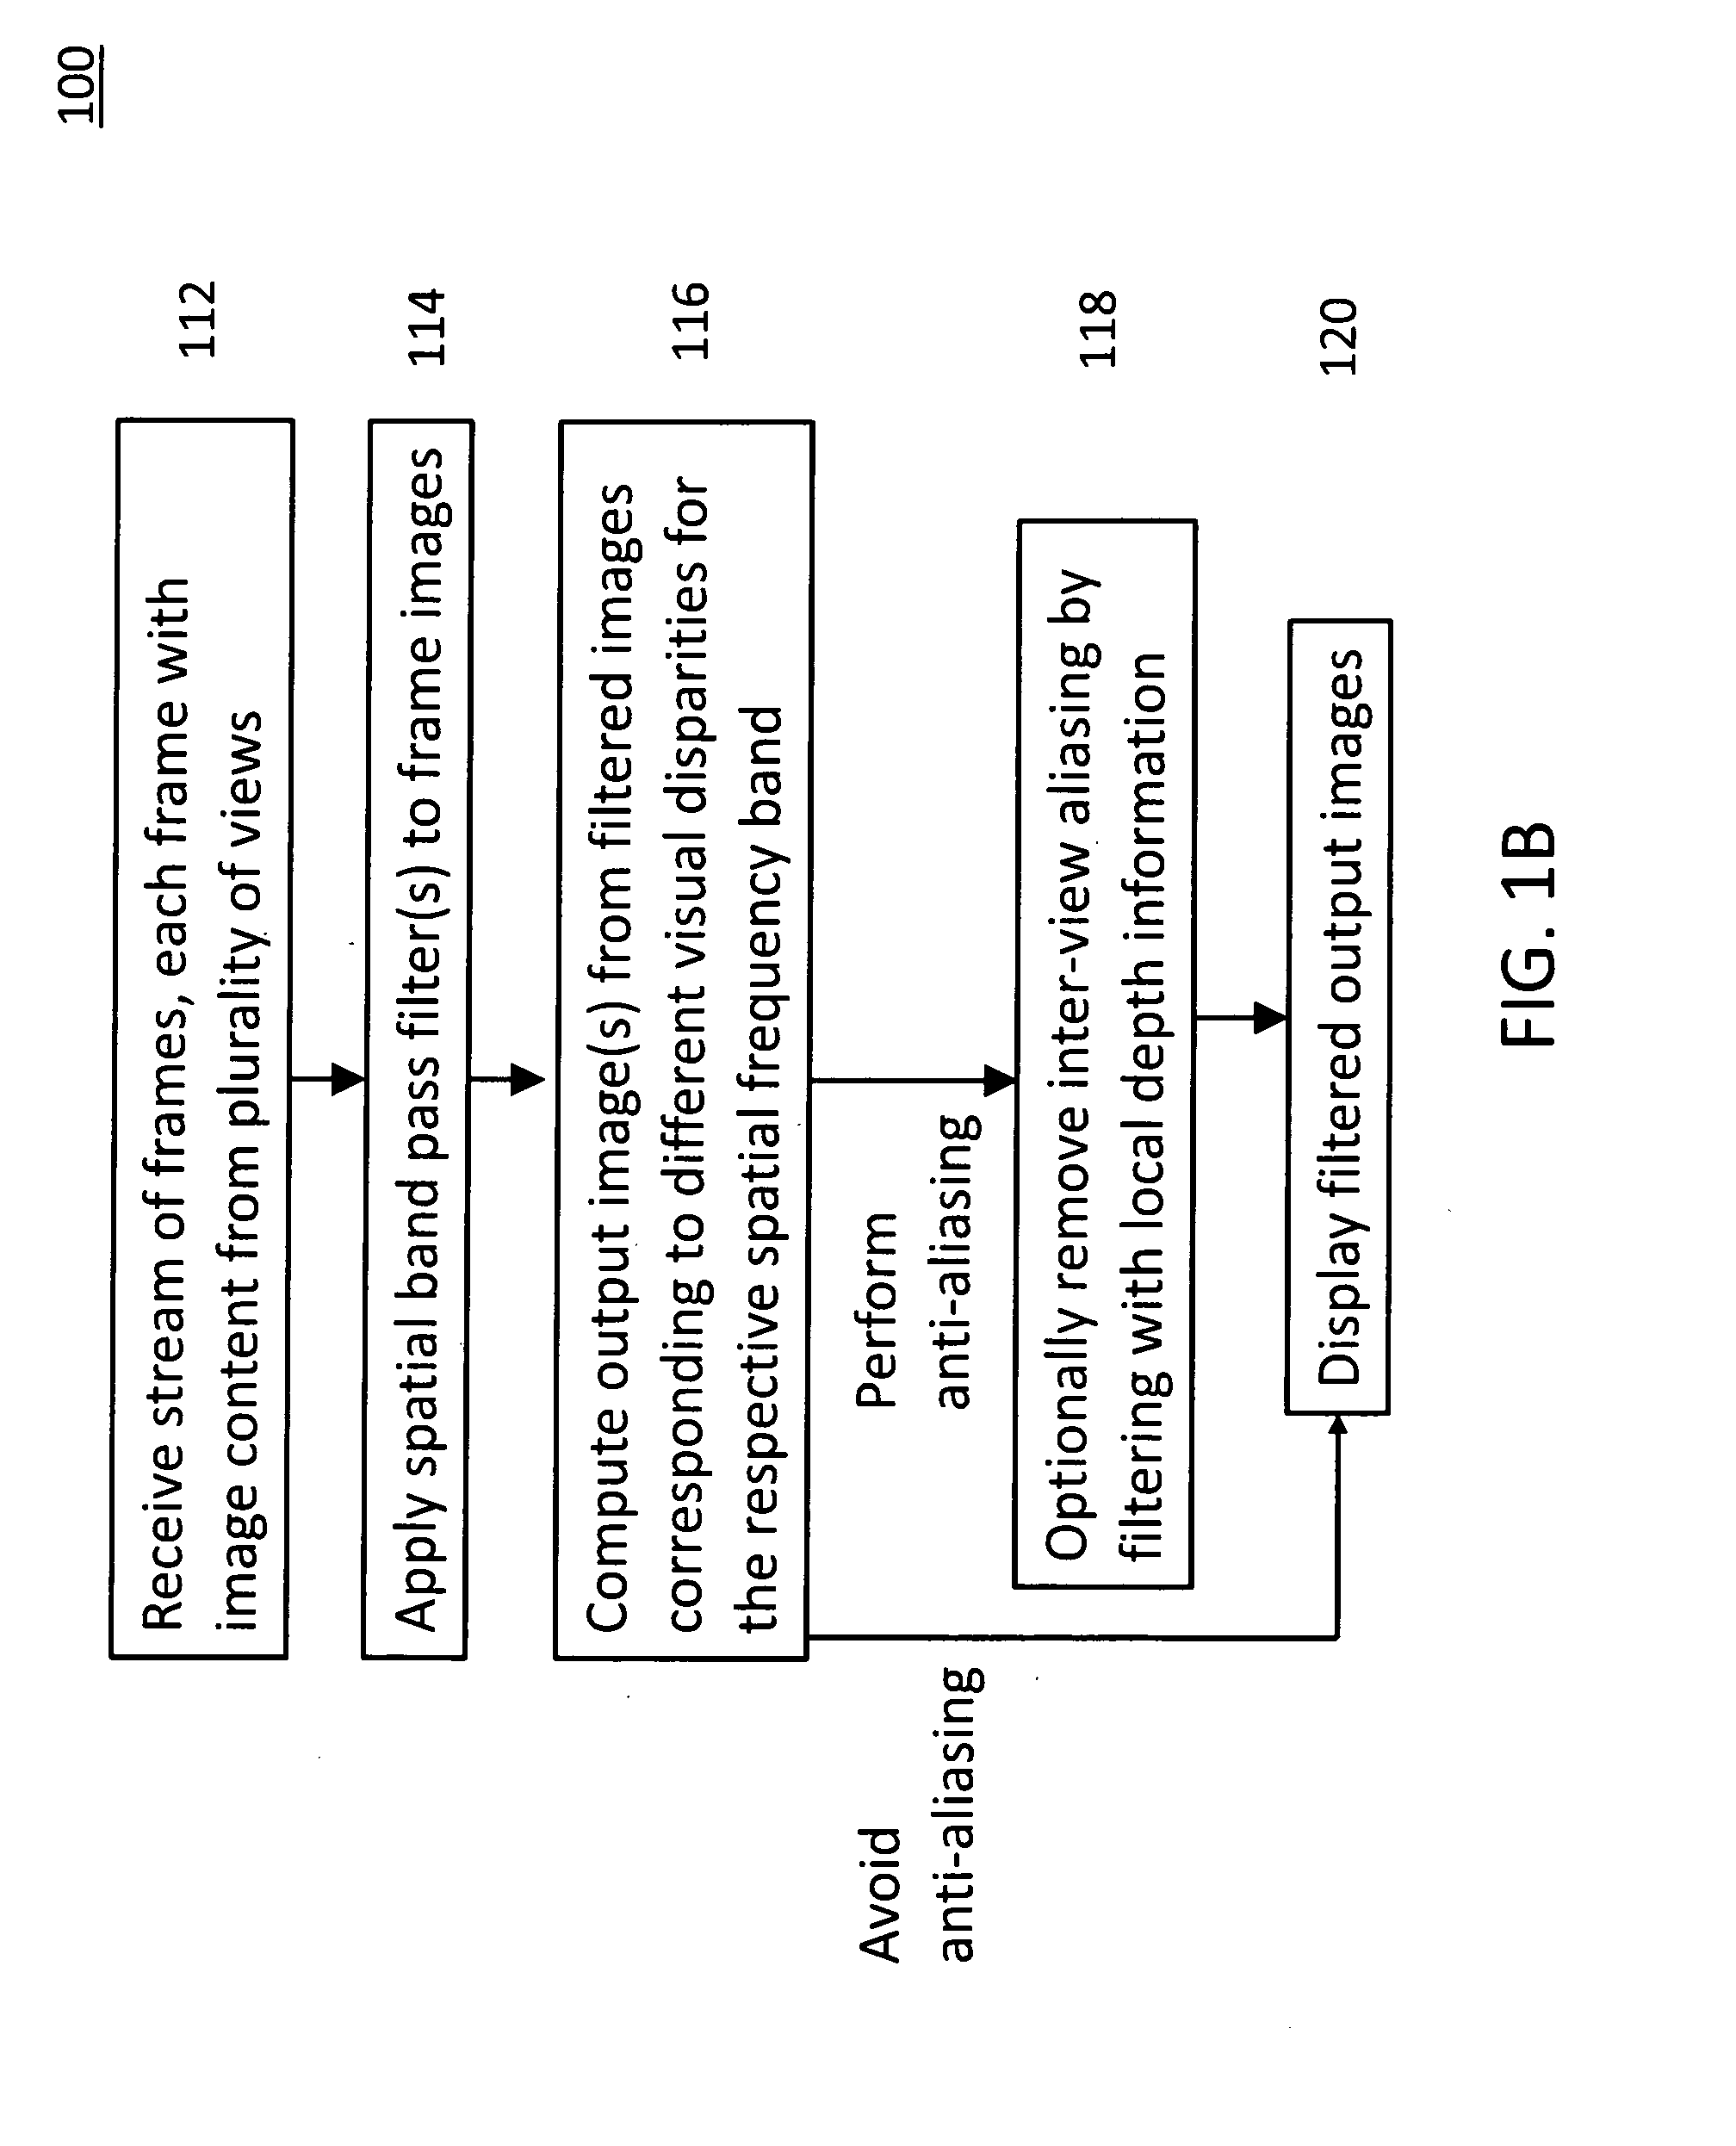 Joint View Expansion And Filtering For Automultiscopic 3D Displays